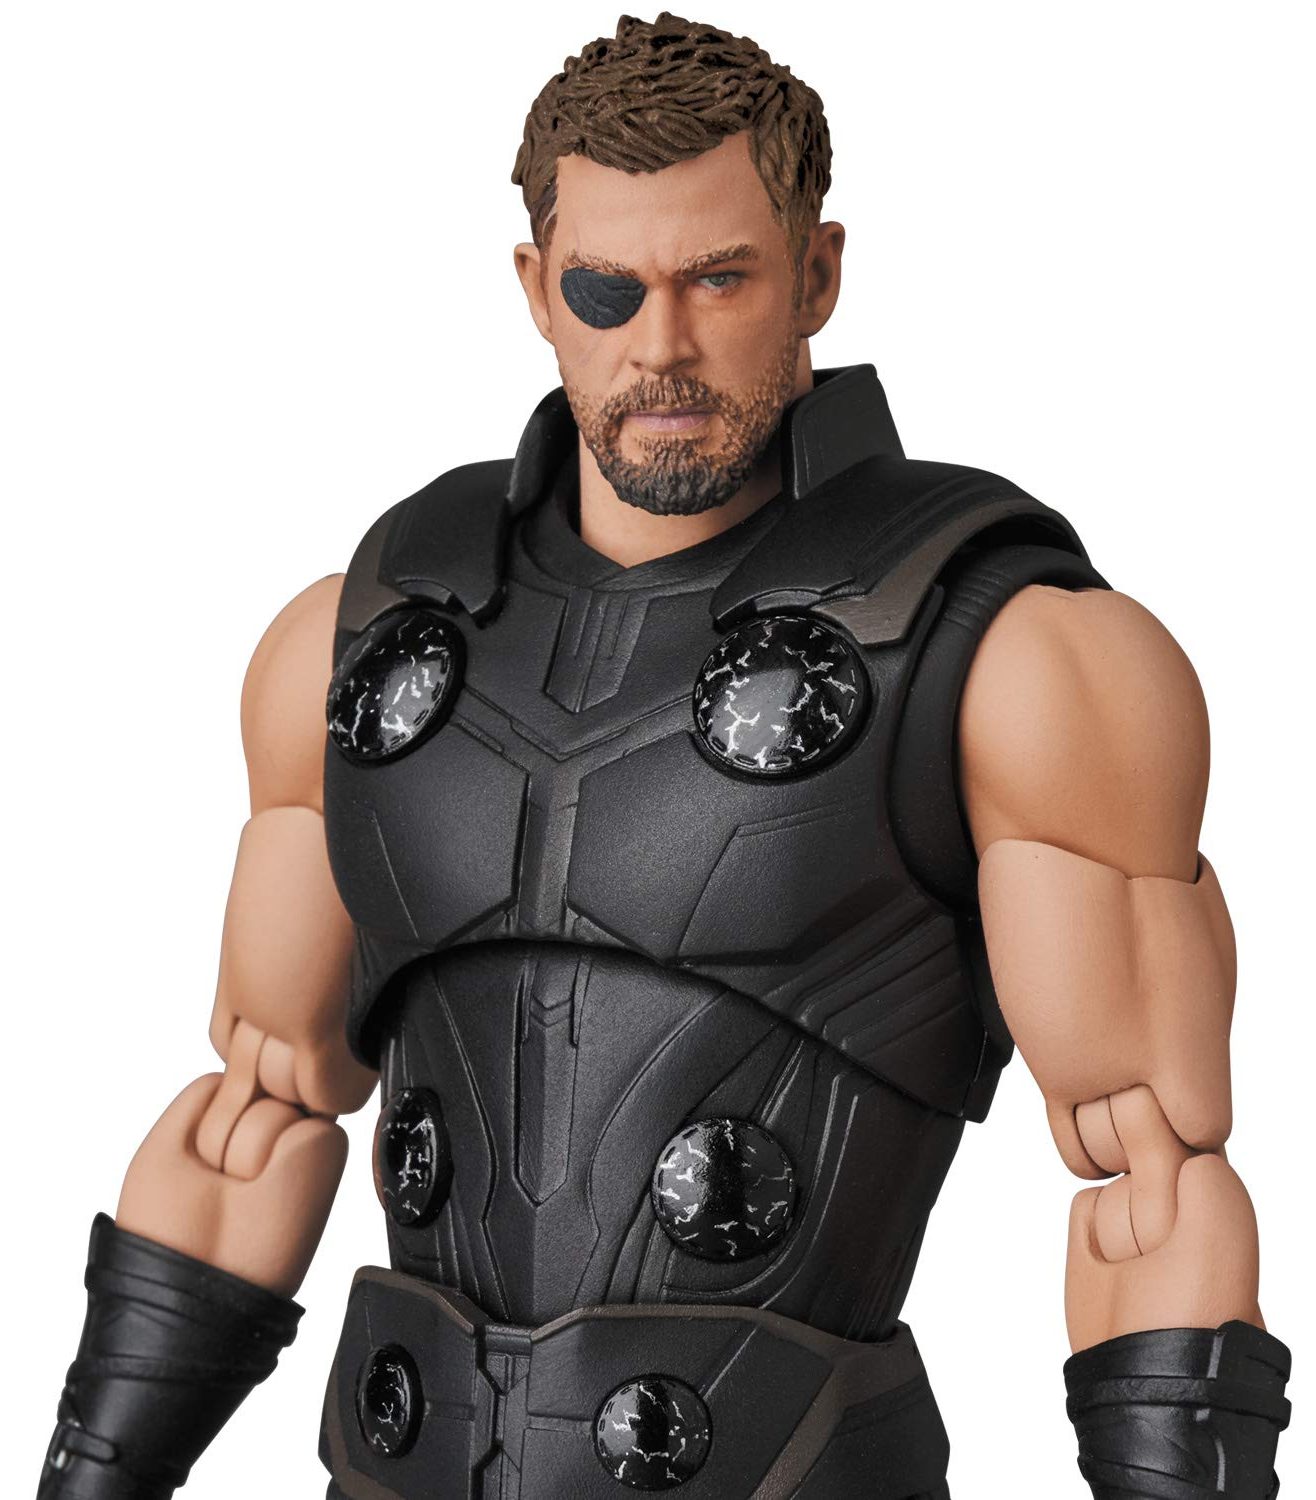 Details about   MEDICOM TOY AVENGERS INFINITY WAR MAFEX NO.104 THOR ACTION FIGURE 